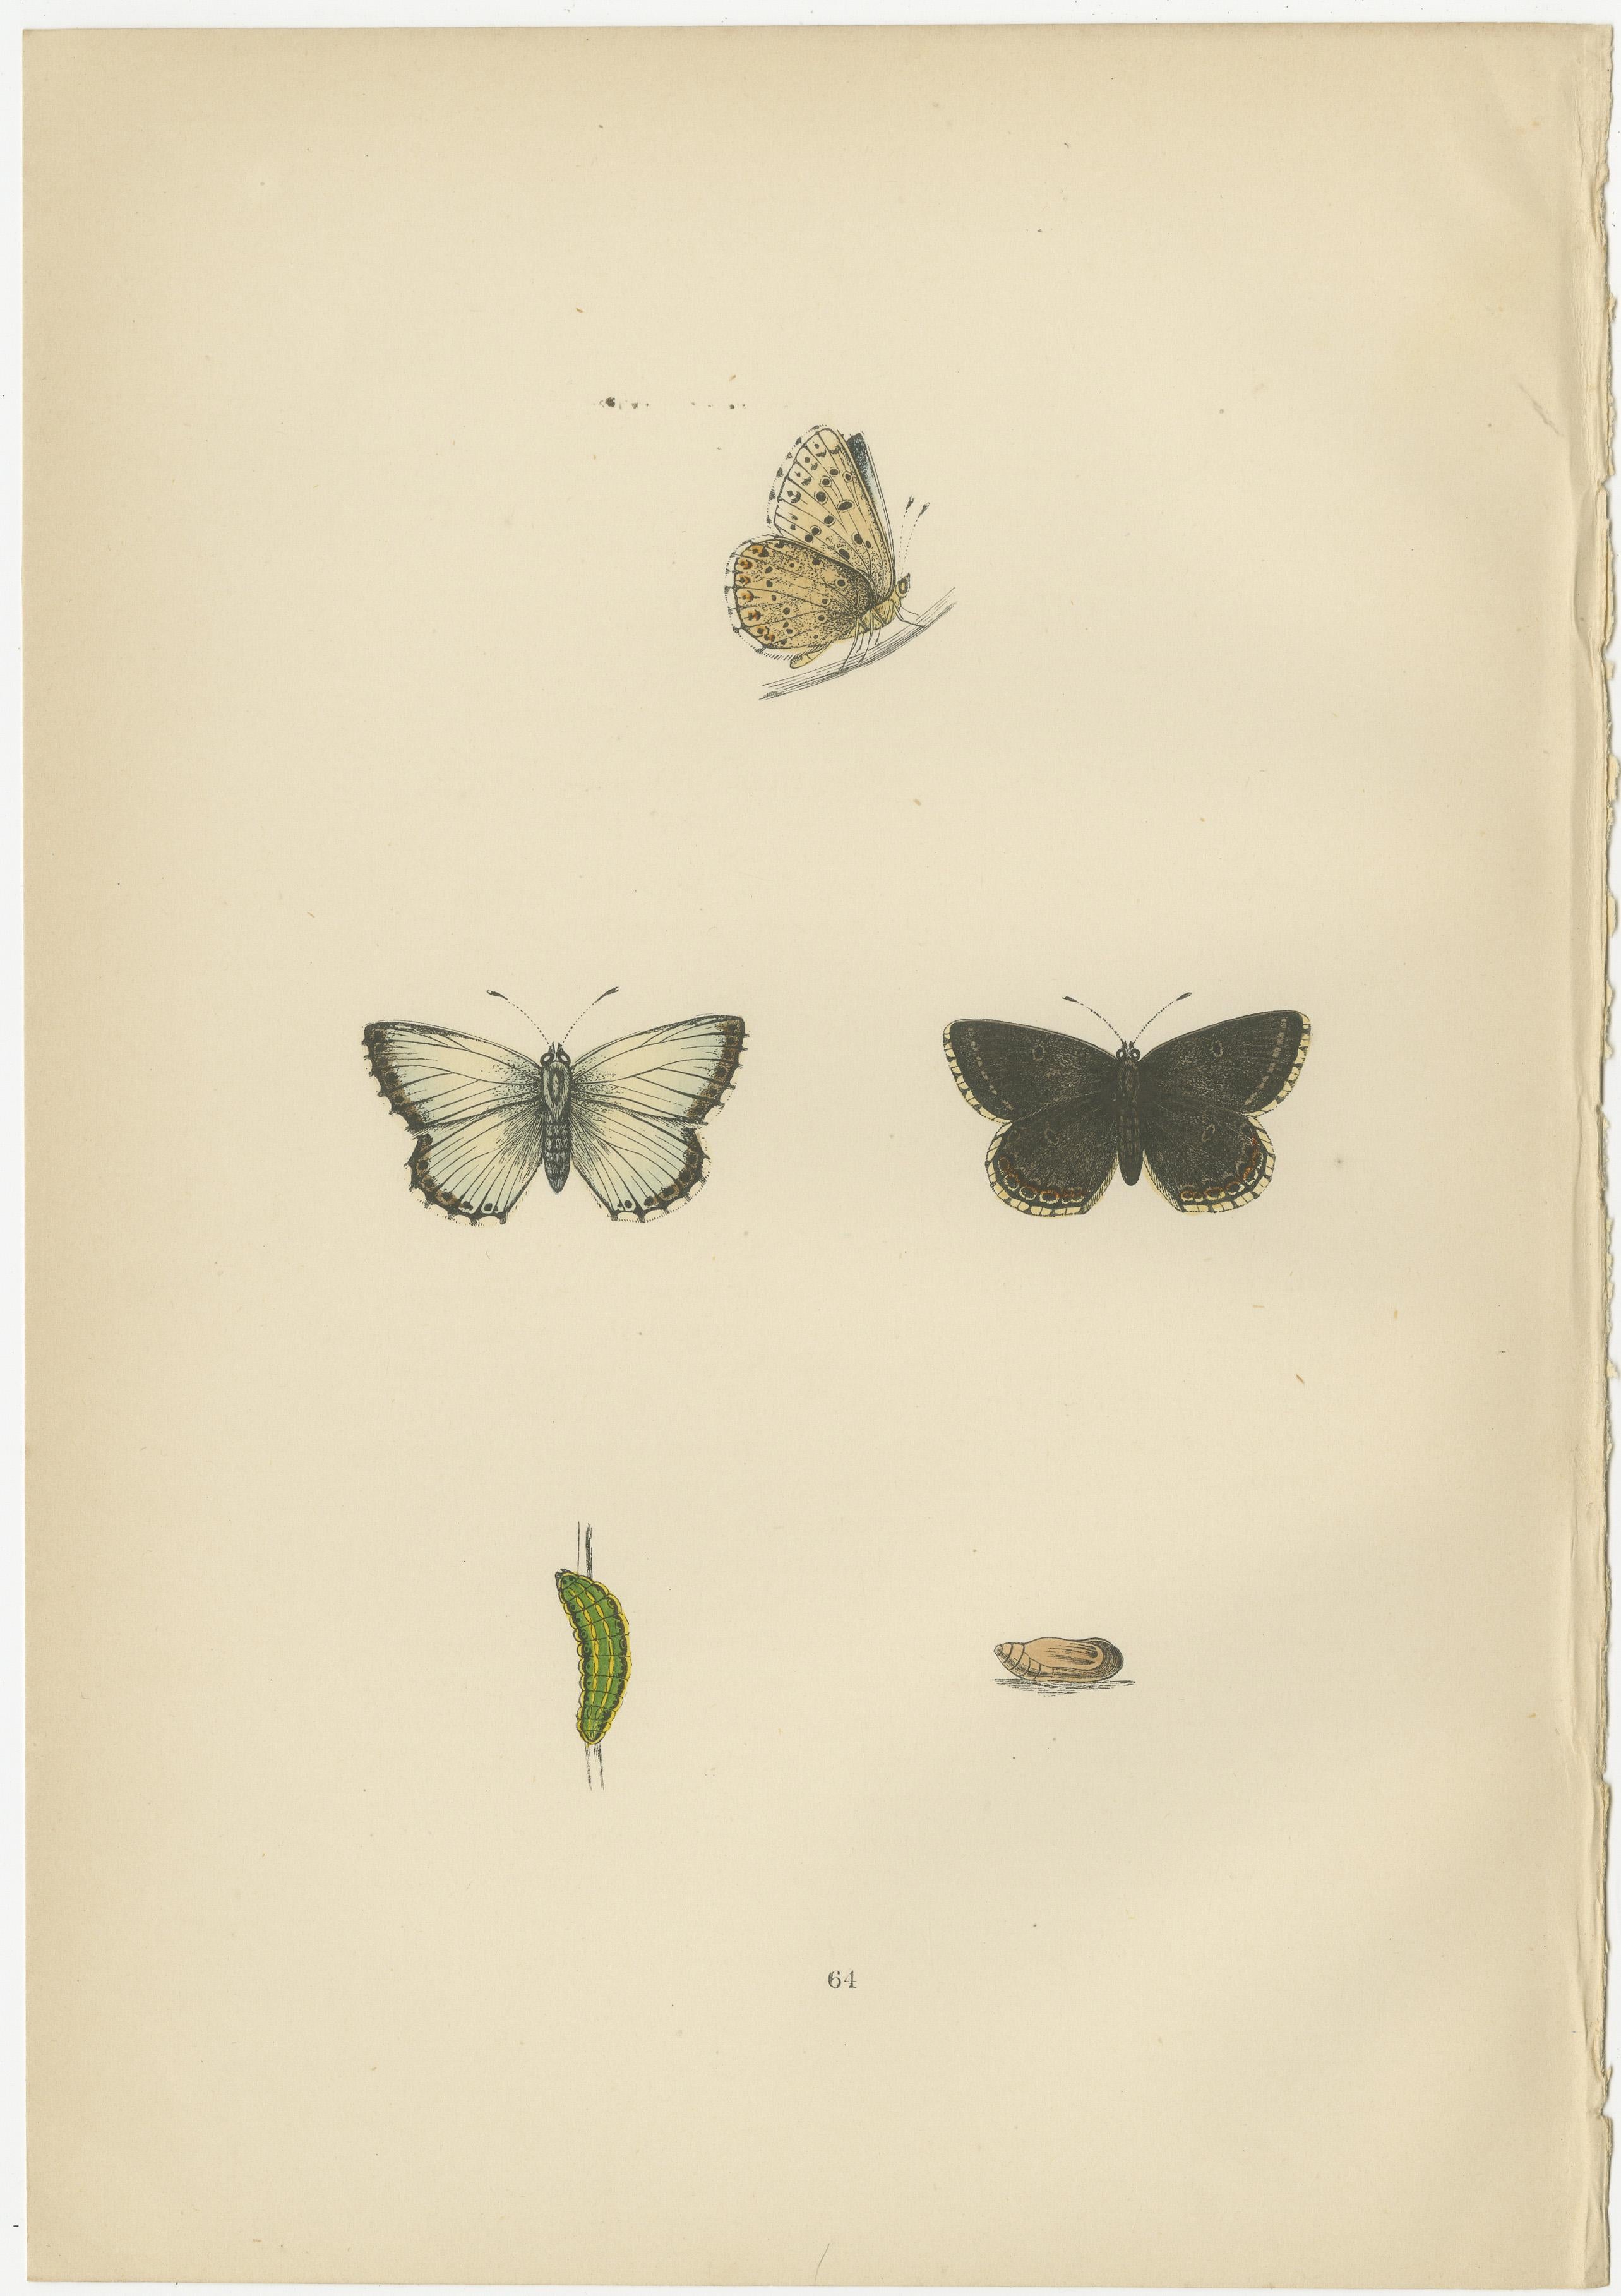 Original antique prints of butterflies, published in the 19th century. These original plates coloured by hand are from the sixth edition of the publication with title: 'A History of British Butterflies' by Morris. Published in London in 1890.